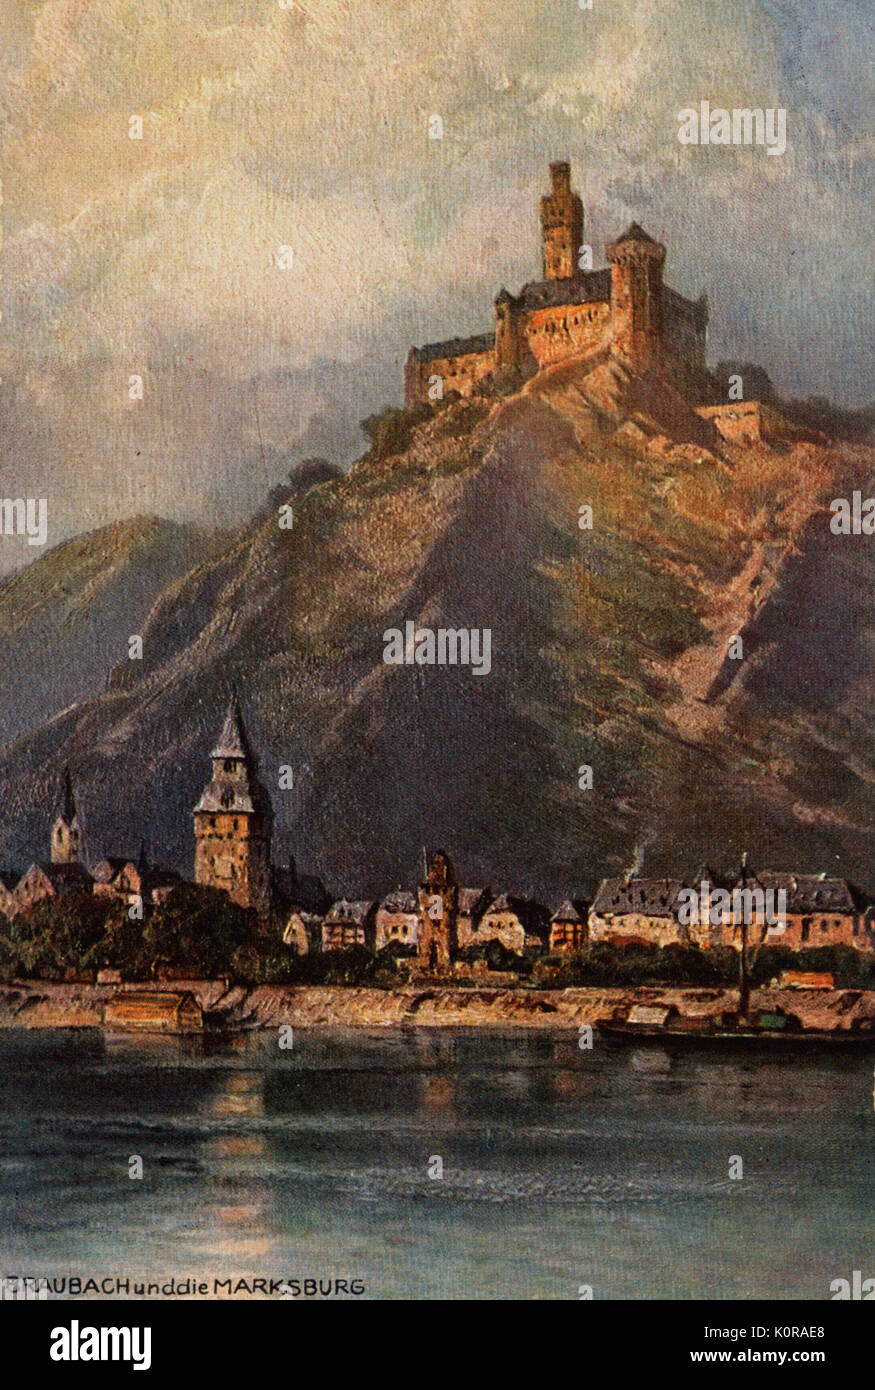 Marksburg Castle and Braubach, scene on the Rhine river, Germany. Illustration after painting by Nikolai Lvovich Astudin (1847 - 1925) Stock Photo